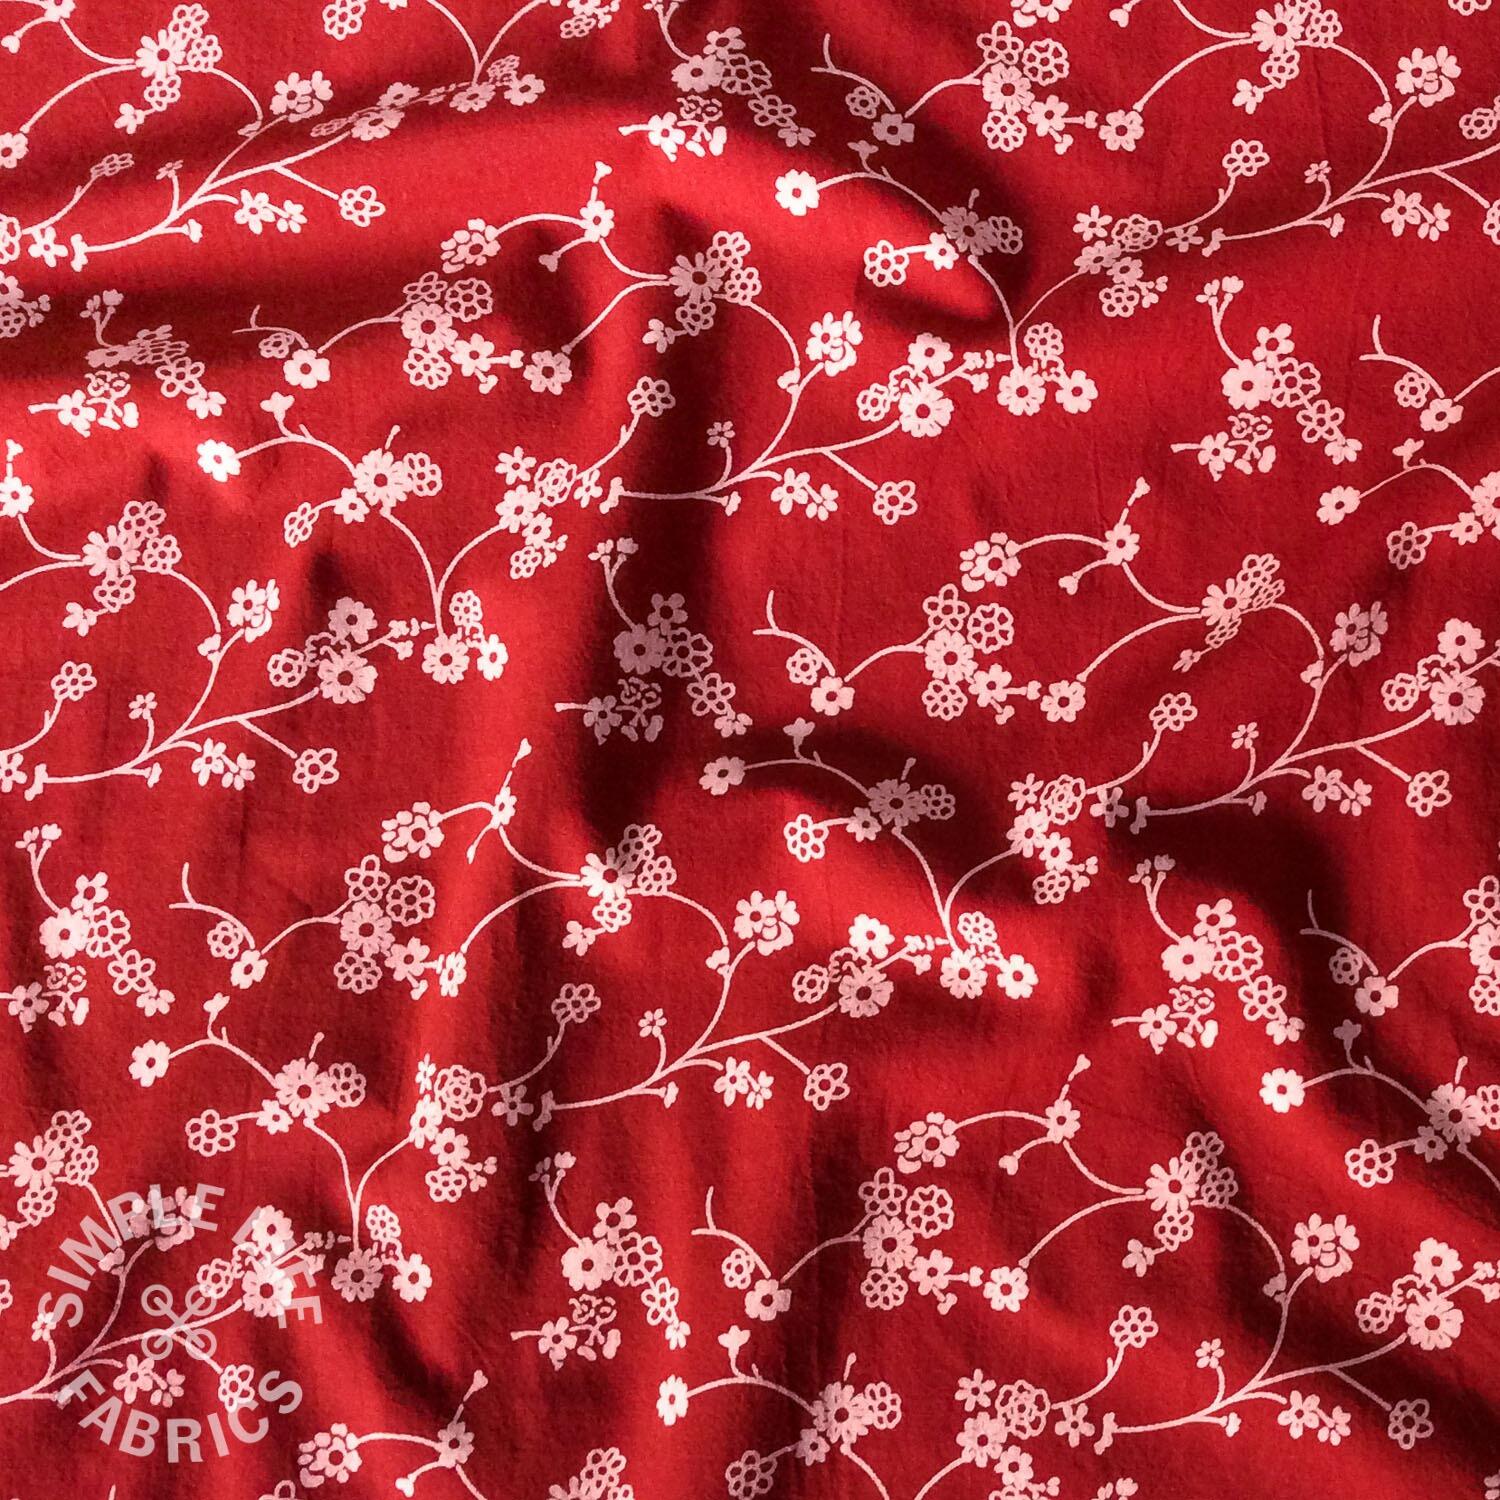 Washed cotton trailing floral fabric